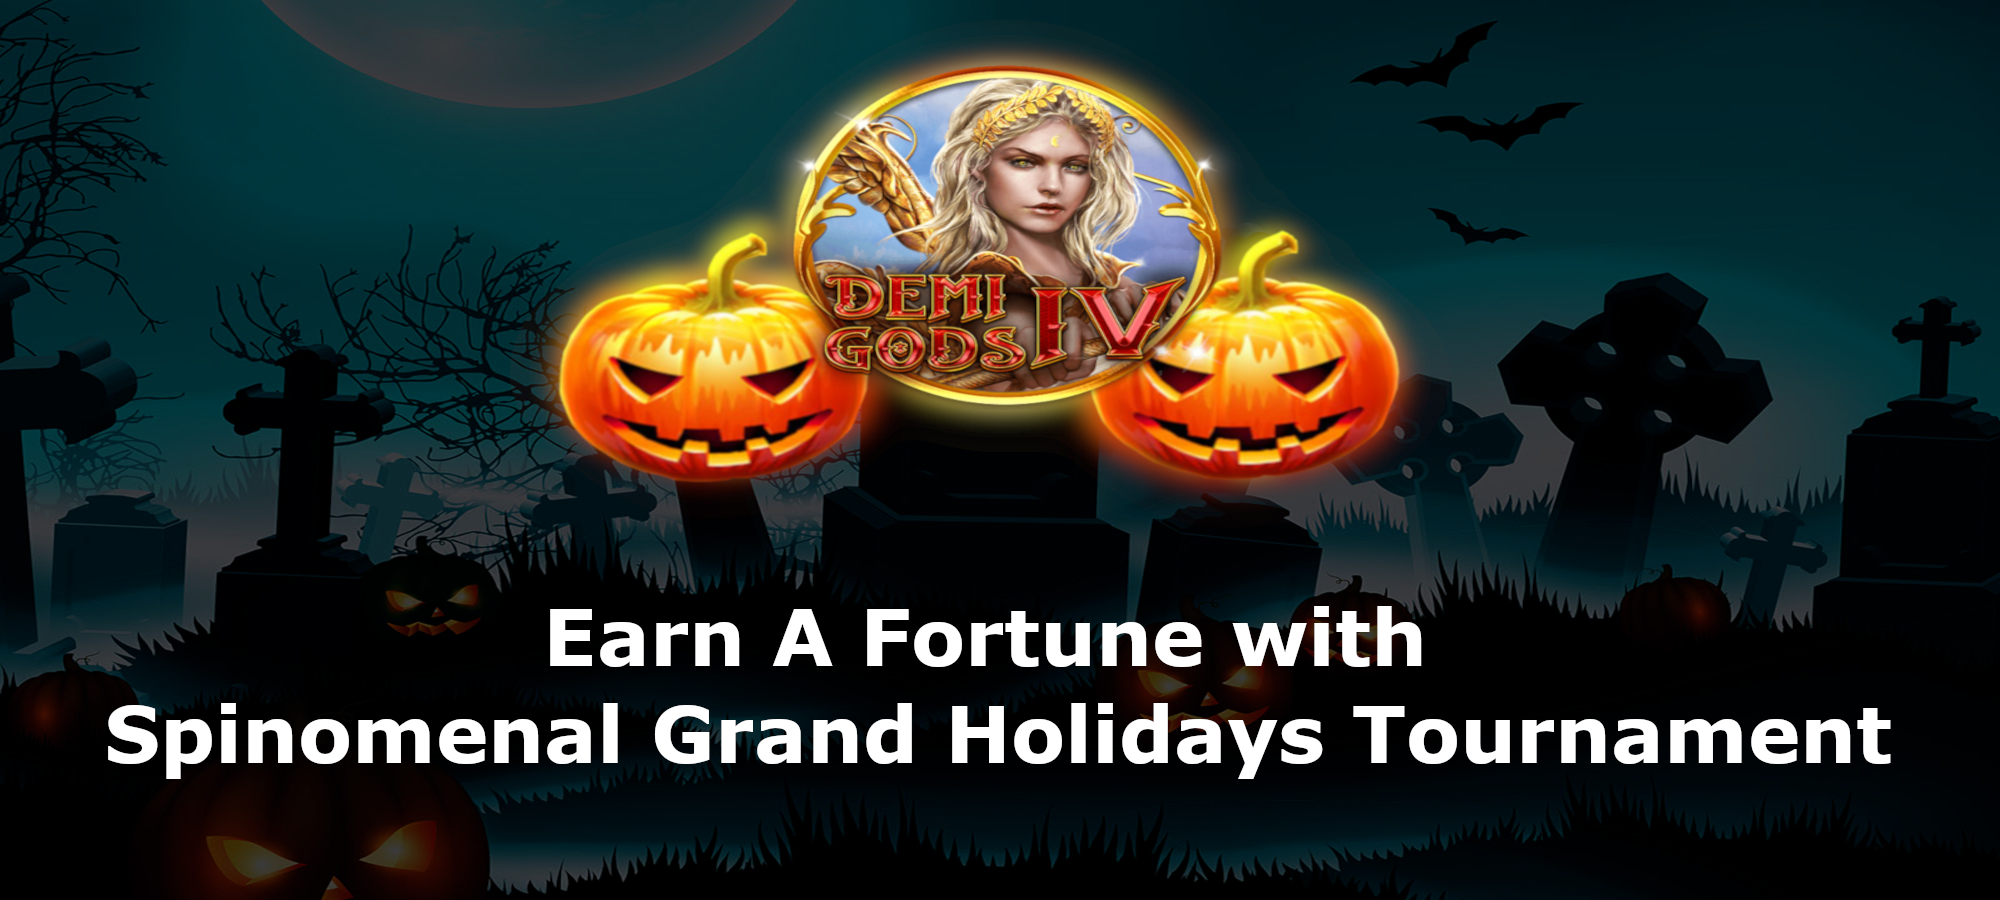 Earn A Fortune with Spinomenal Grand Holidays Tournament